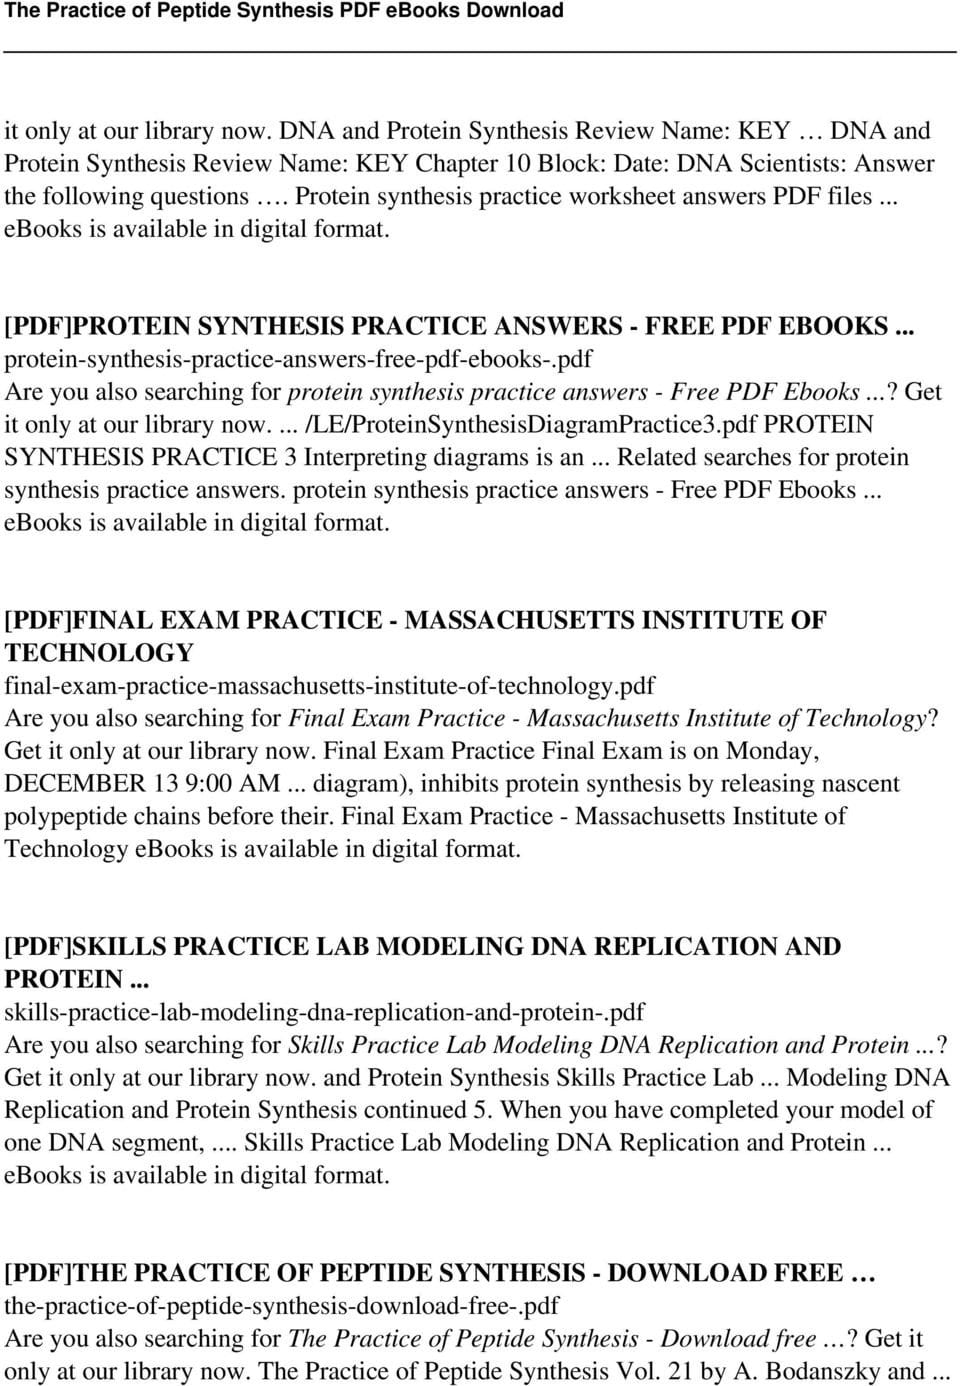 The Practice Of Peptide Synthesis  Pdf Pertaining To Protein Synthesis Worksheet Pdf